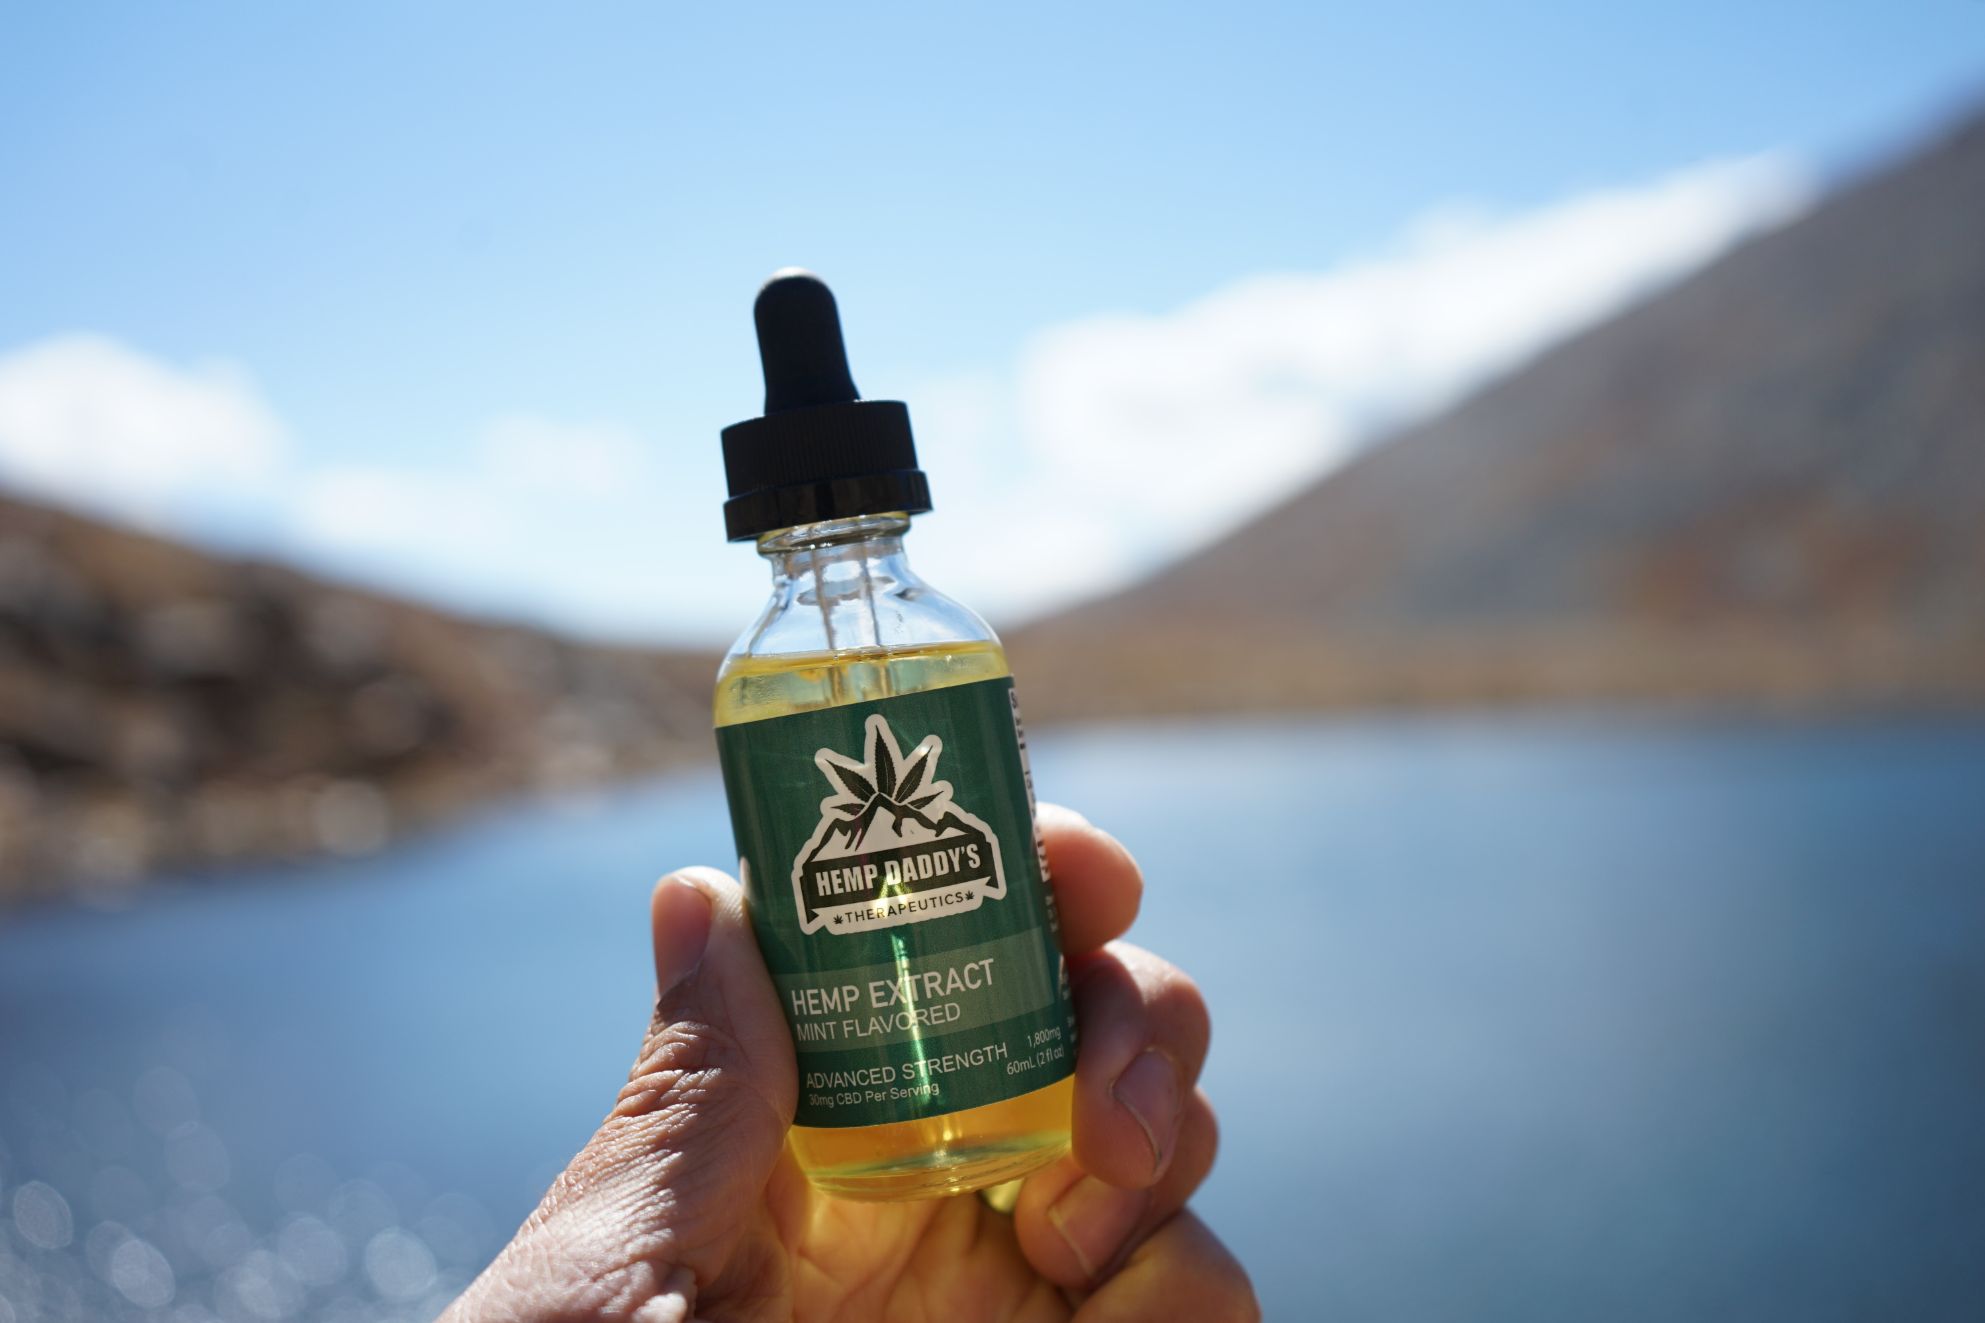 CBD Grows In Popularity: 14 States with legal CBD Oil